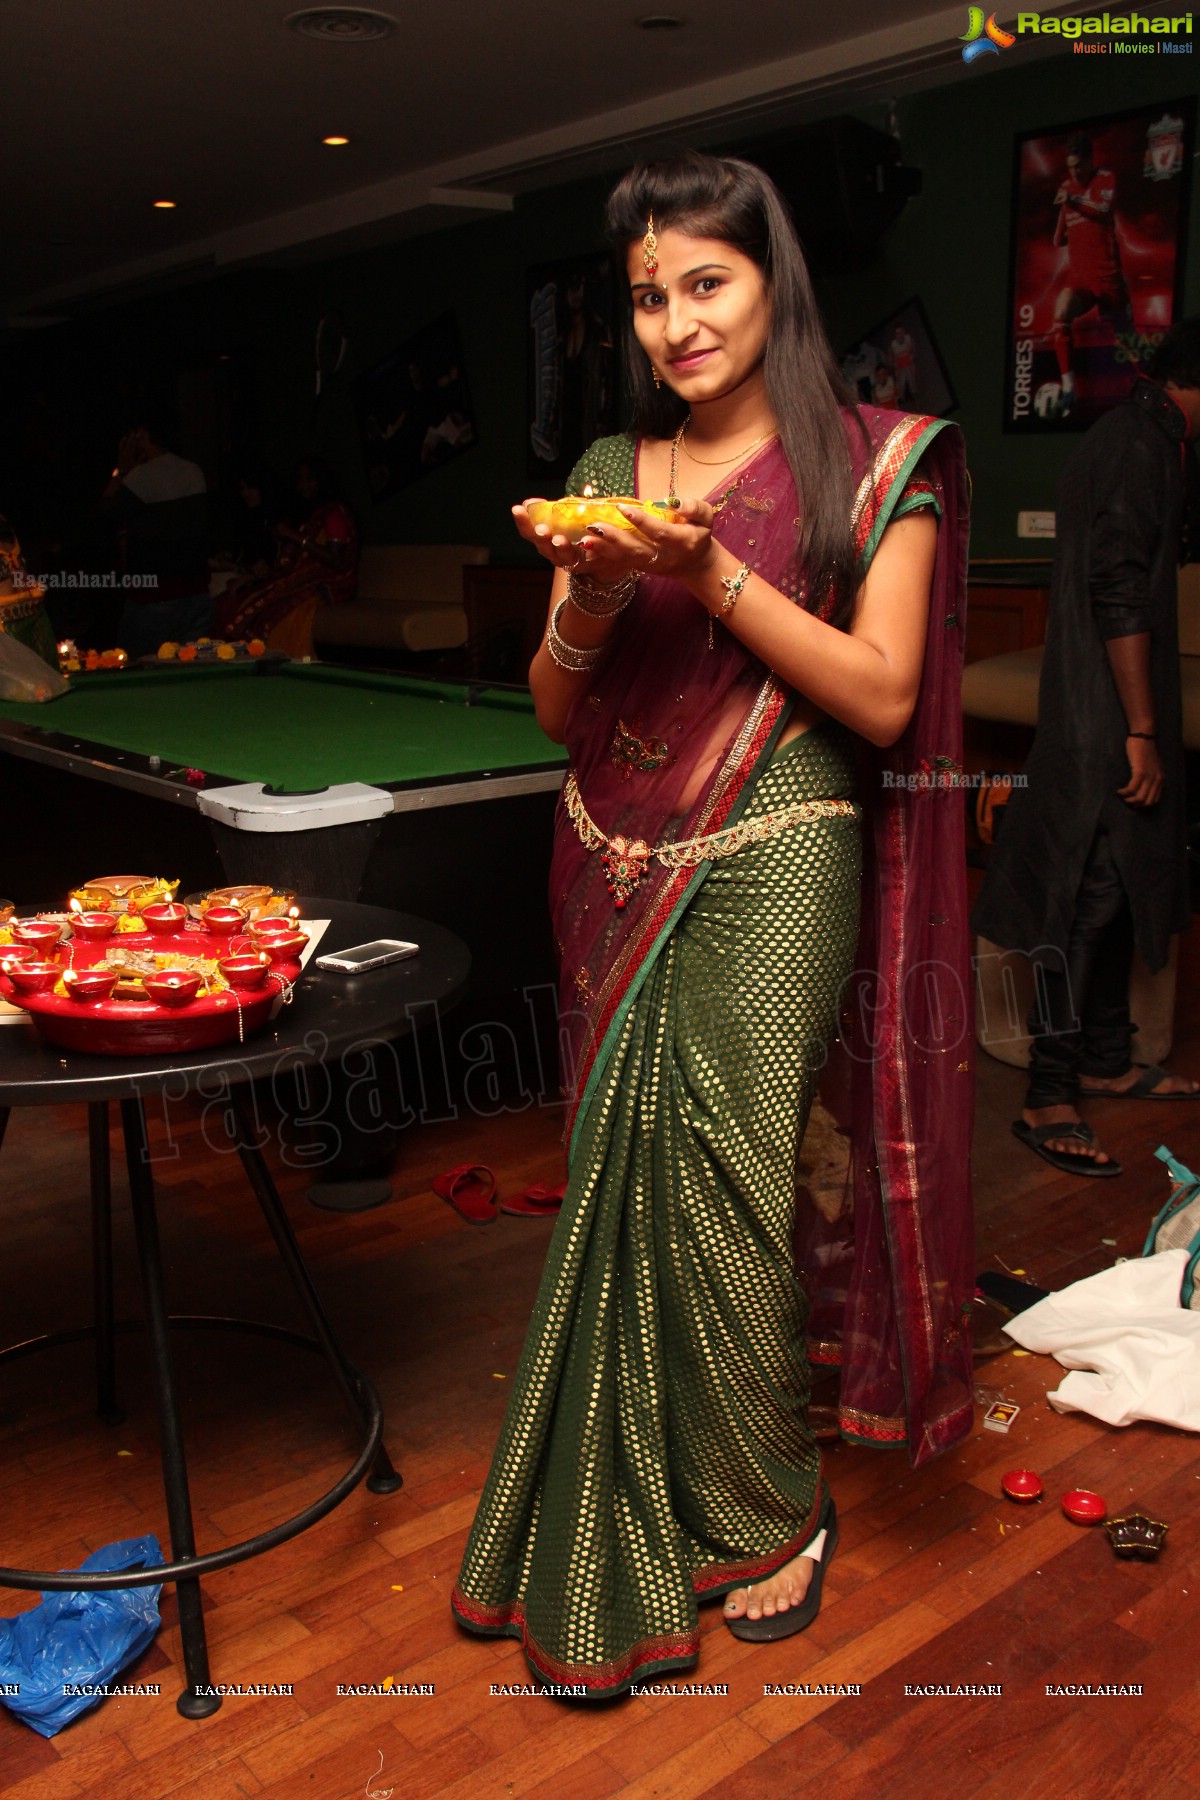 Hamstech's Grand Diwali Party 2013 at 10 Lounge, Secunderabad